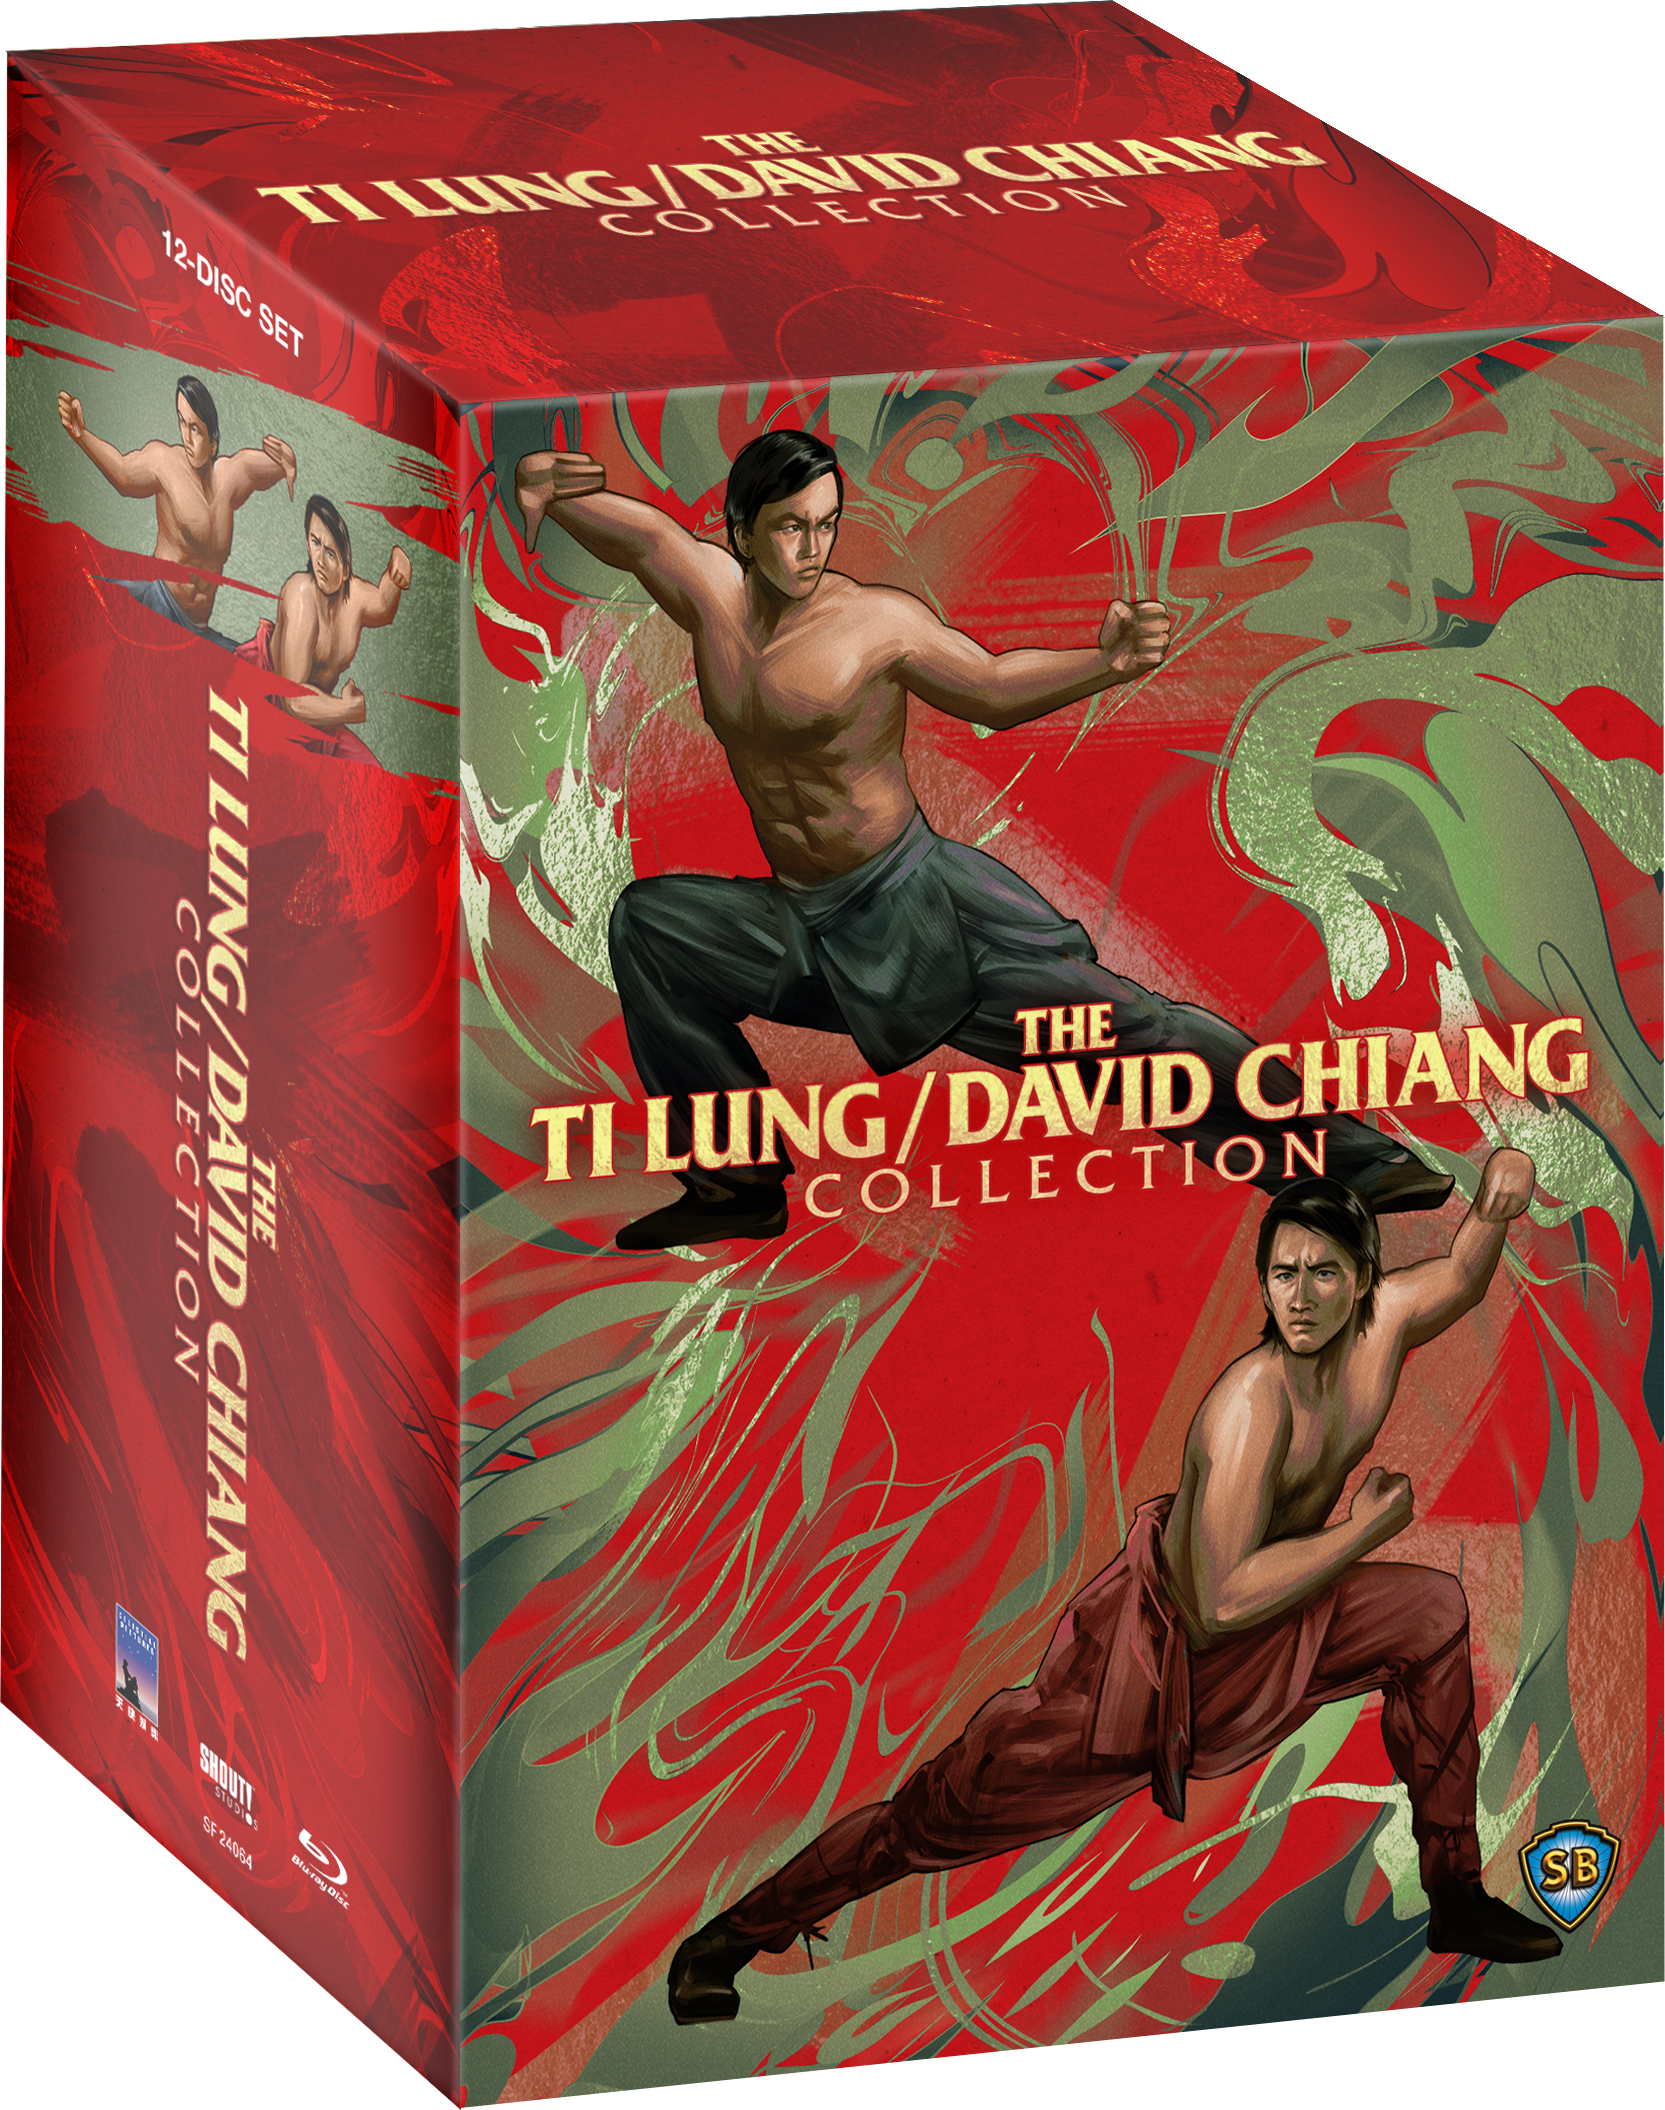 The Ti Lung / David Chiang Collection Blu-ray